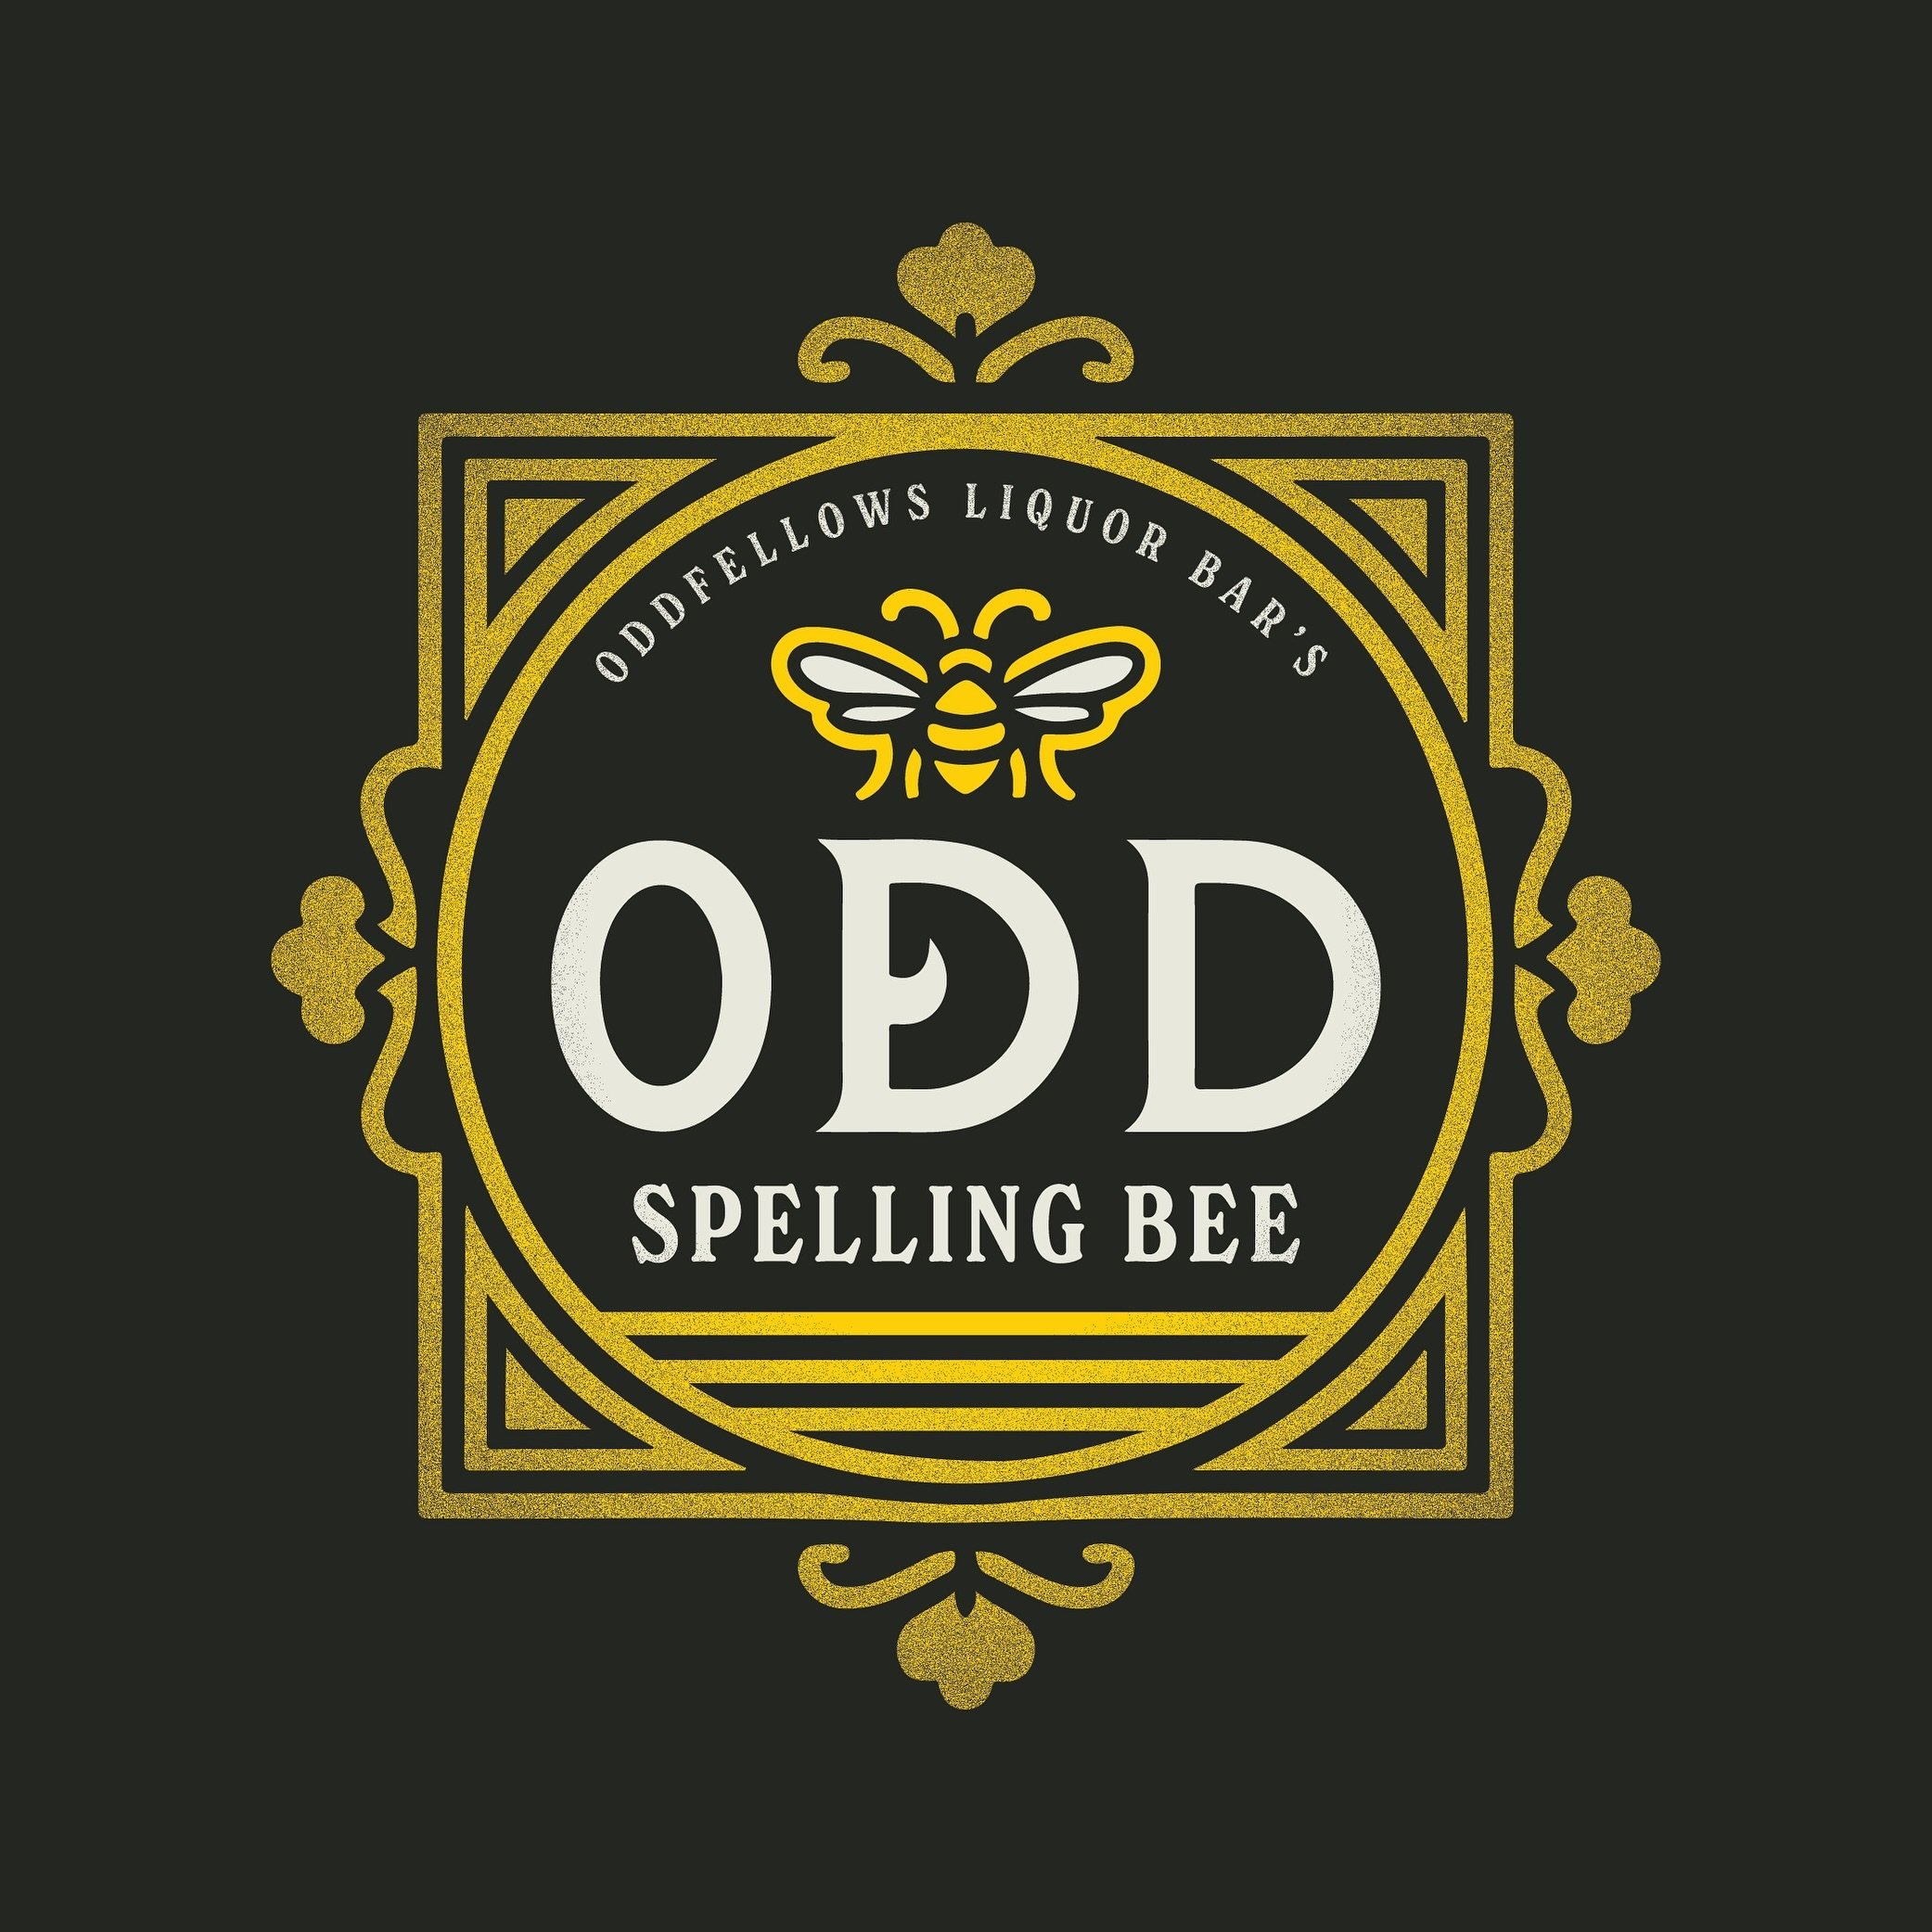 MARK YOUR CALENDARS! In 2 day the Odd Spelling Bee returns for a night of debauchery and elementary nostalgia. Registration starts at 7:30, the Bee starts at 8 🐝 Buzz on in this Tuesday, we&rsquo;ll see you then!